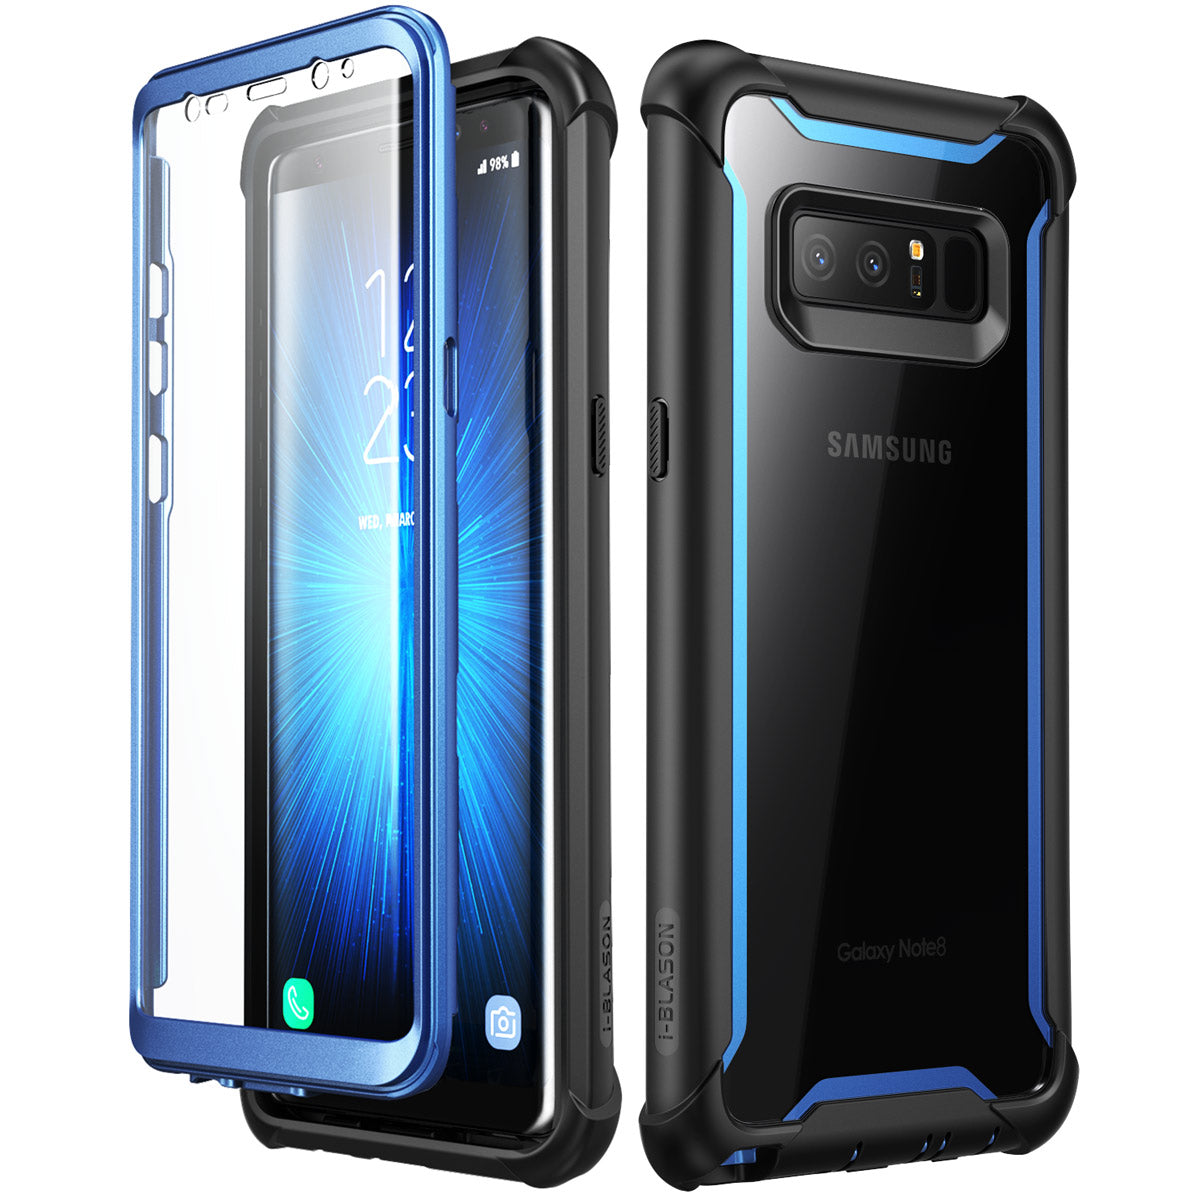 i-Blason Samsung Galaxy Note 8 case [Ares Series] Full-body Rugged Clear Bumper Case with Built-in Screen Protector for Samsung Galaxy Note 8 2017 Release (Black/Blue)